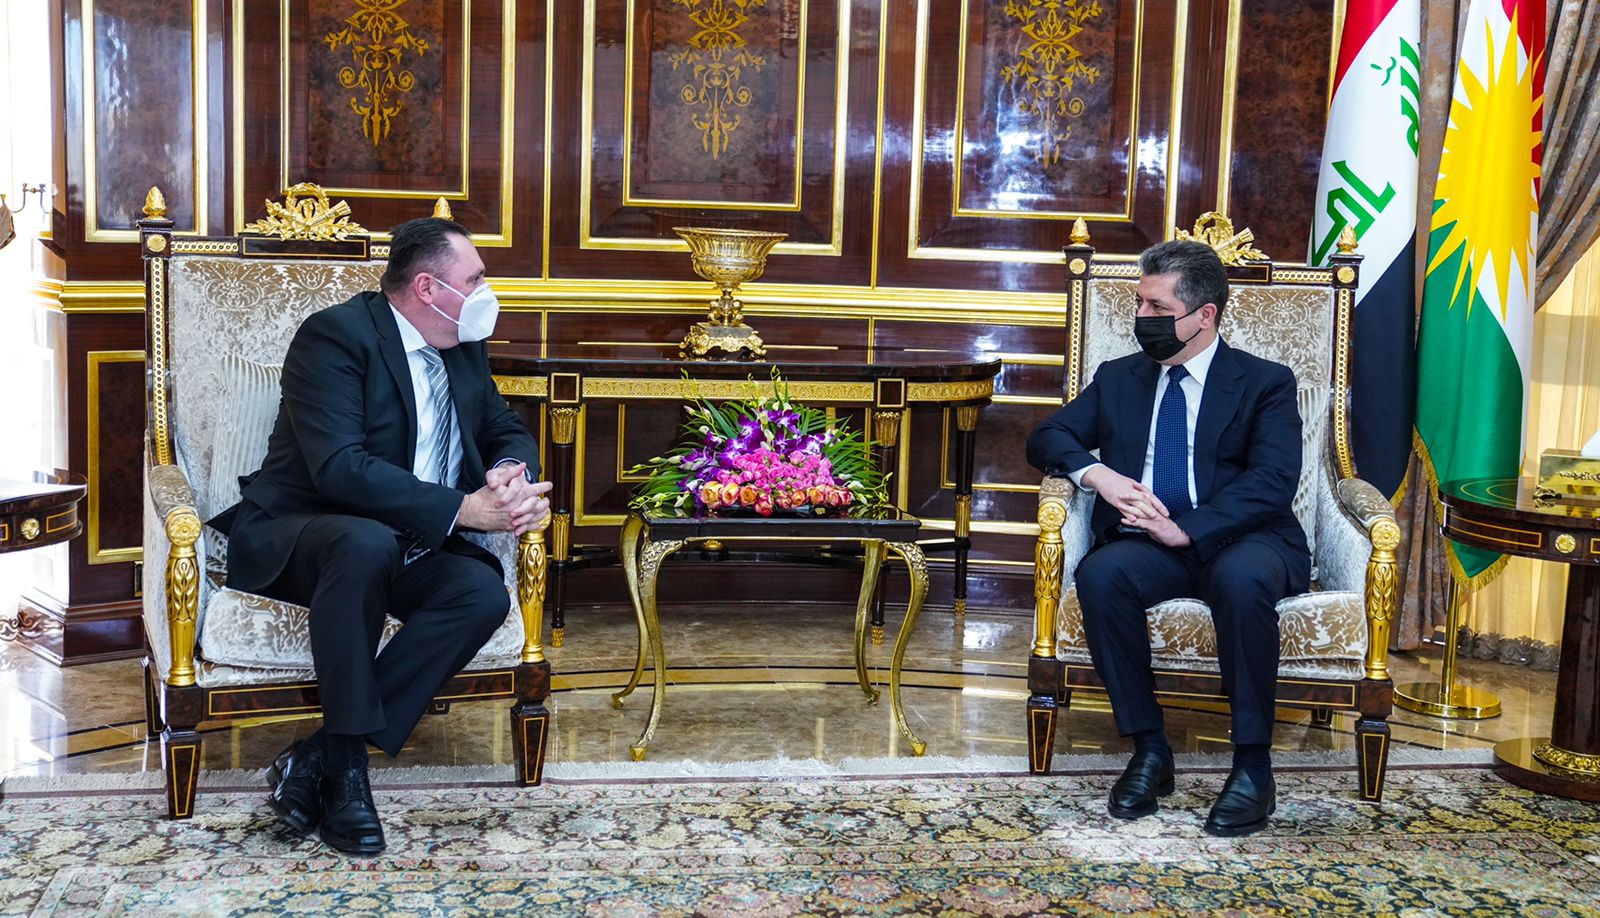 The Czech Republic expresses readiness to strengthen relations with Erbil